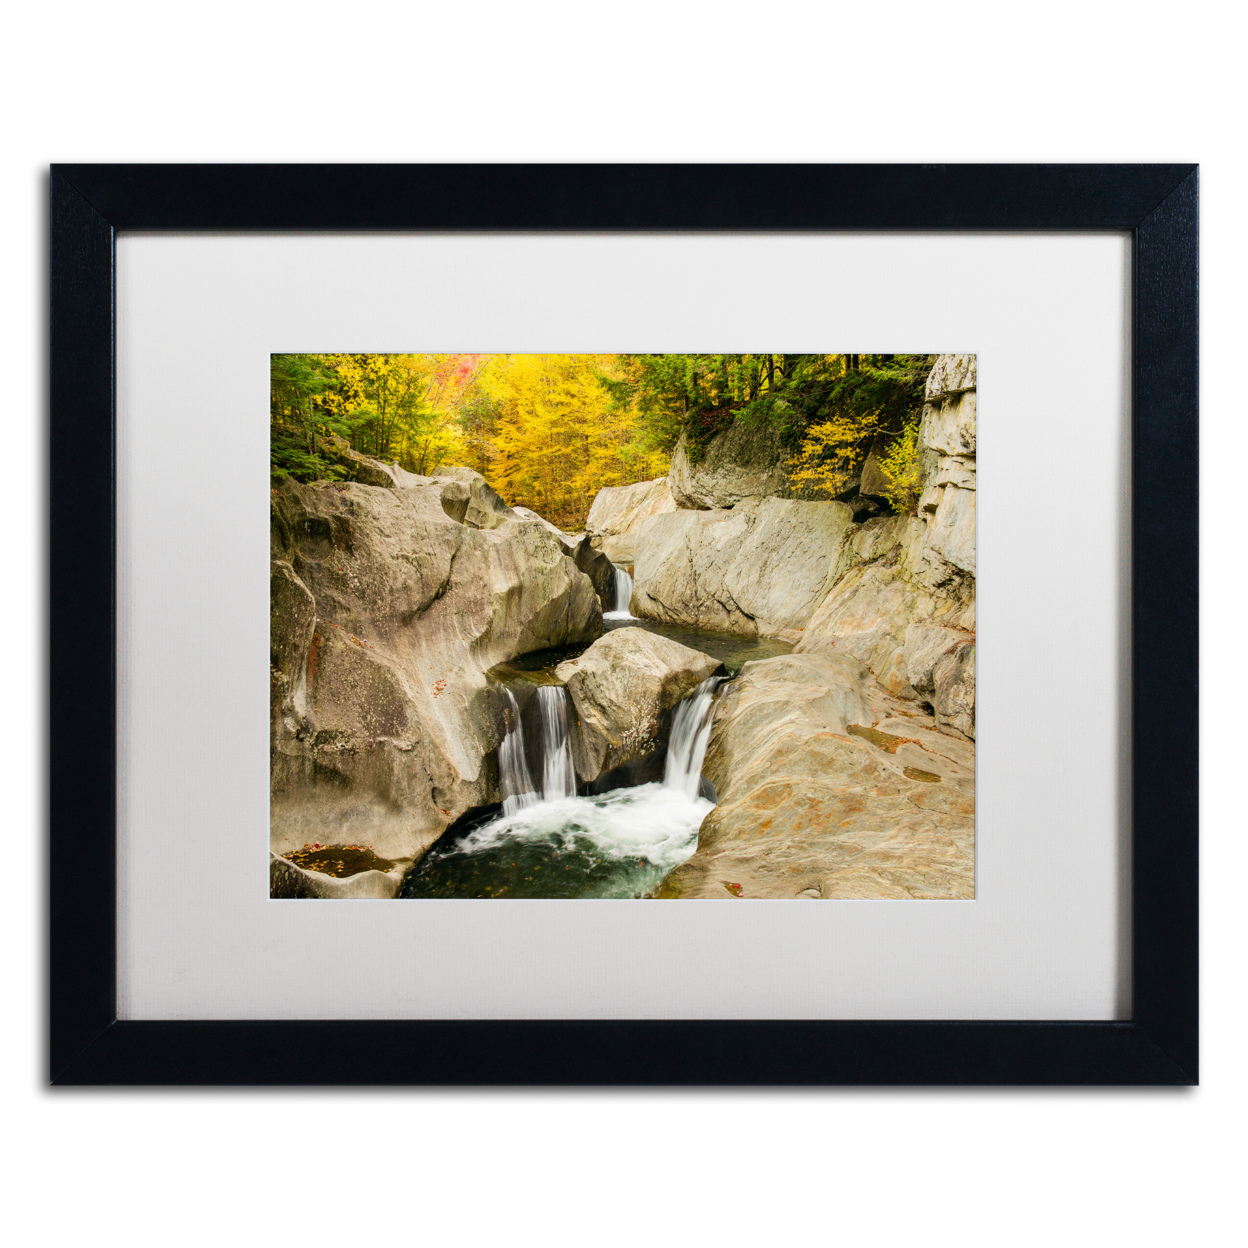 Michael Blanchette Photography 'Fall At The Falls' Black Wooden Framed Art 18 X 22 Inches